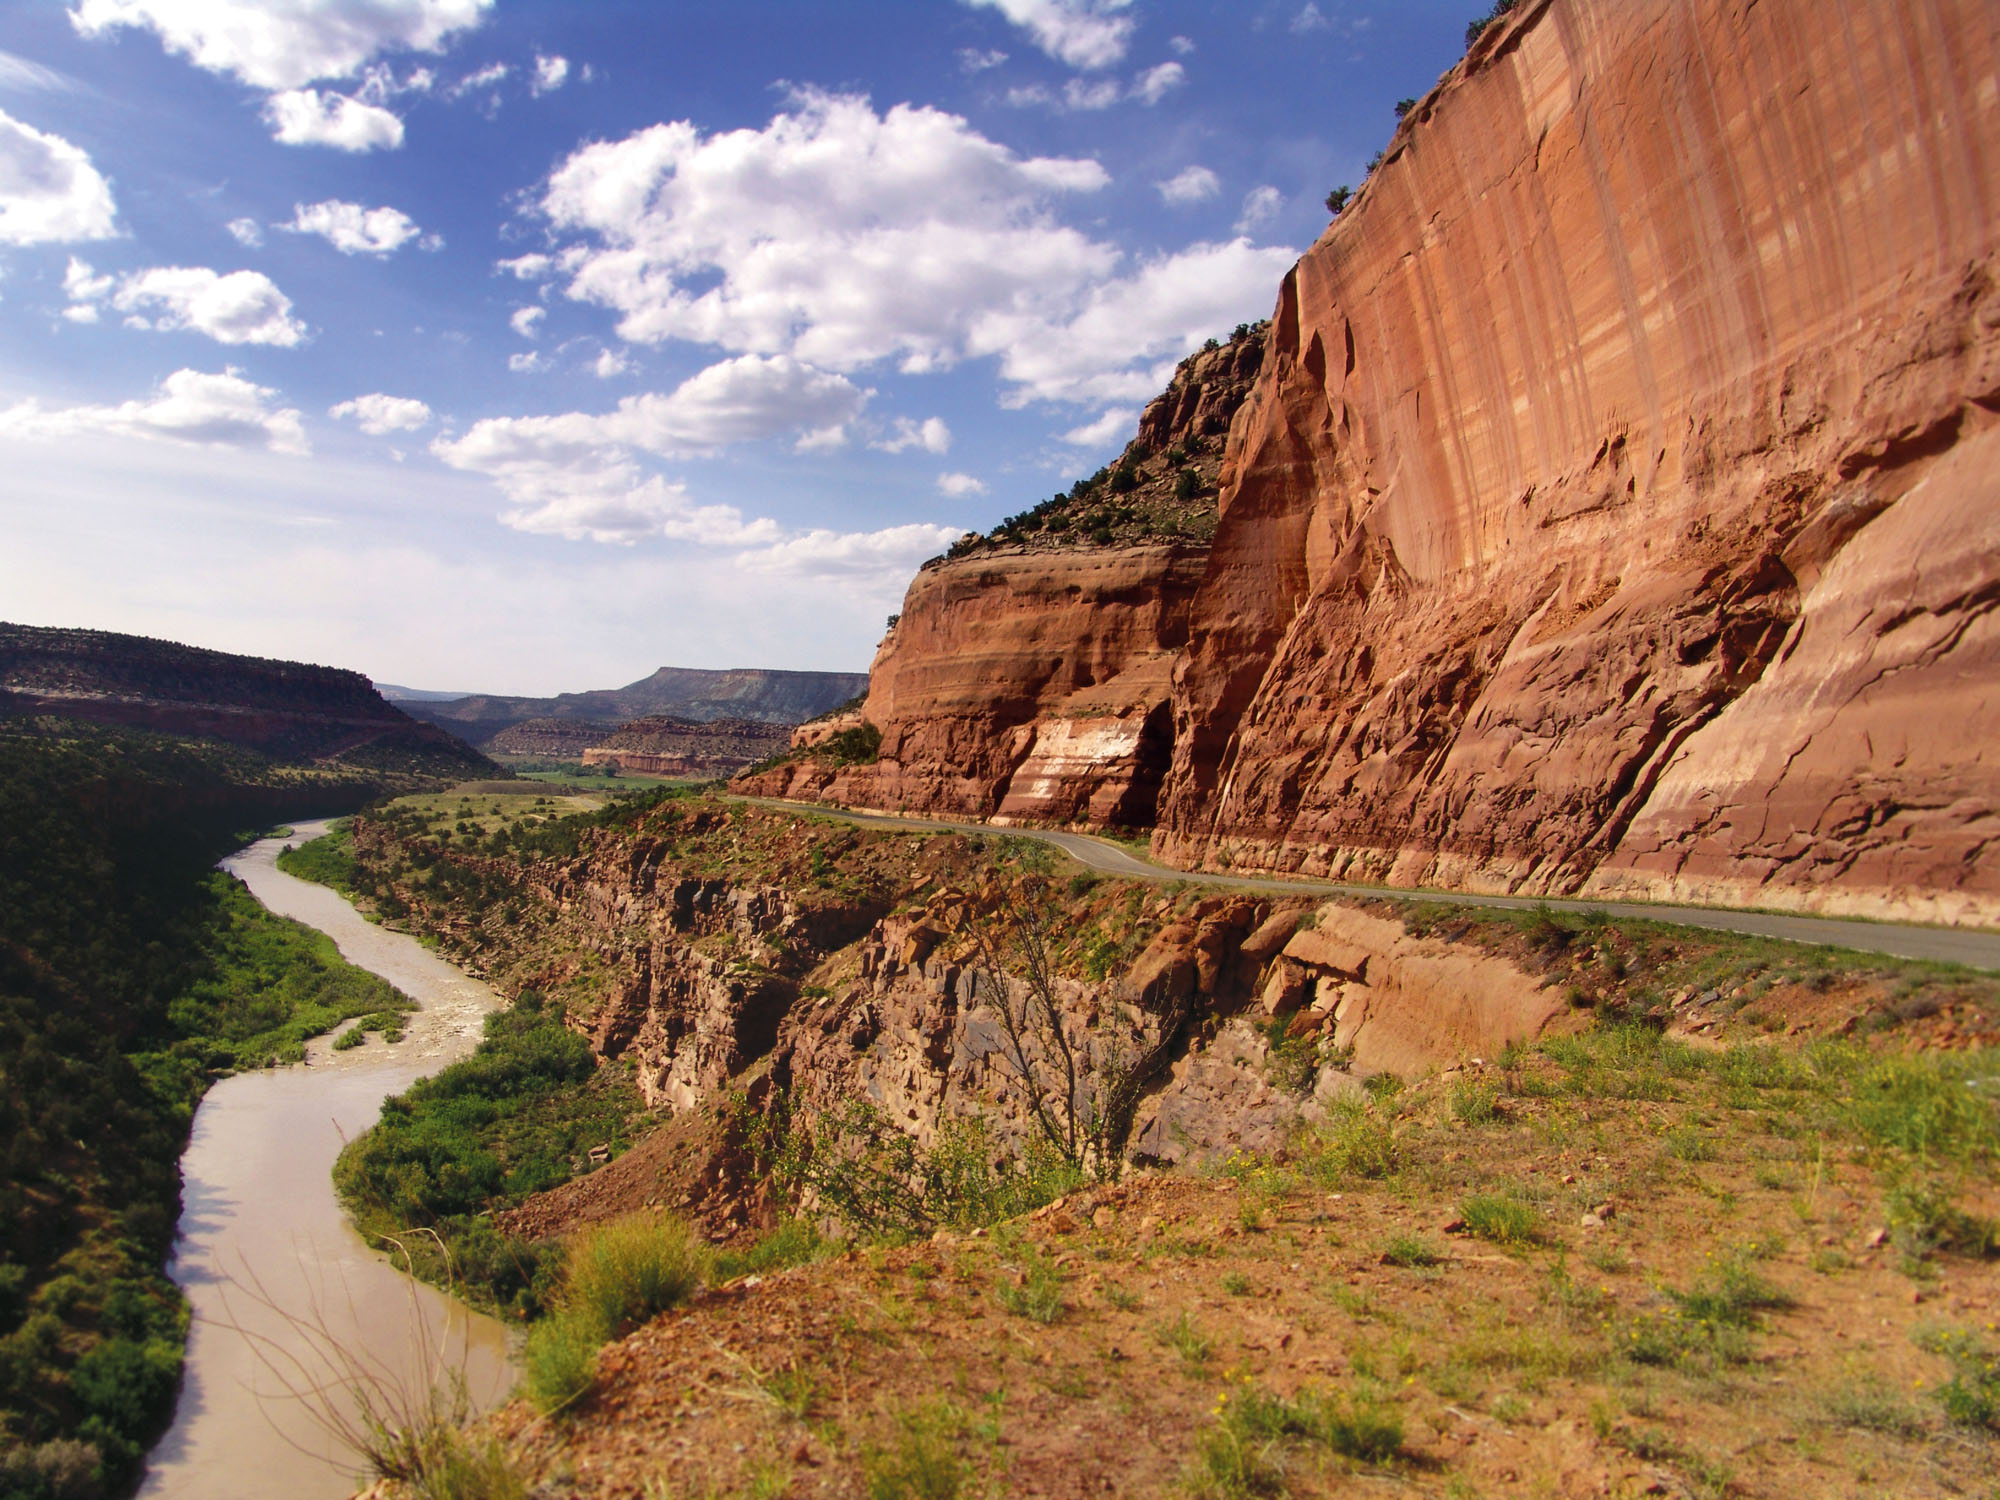 On Colorado's Scenic Byway 141, Gateway Canyons will be a welcome stop ...